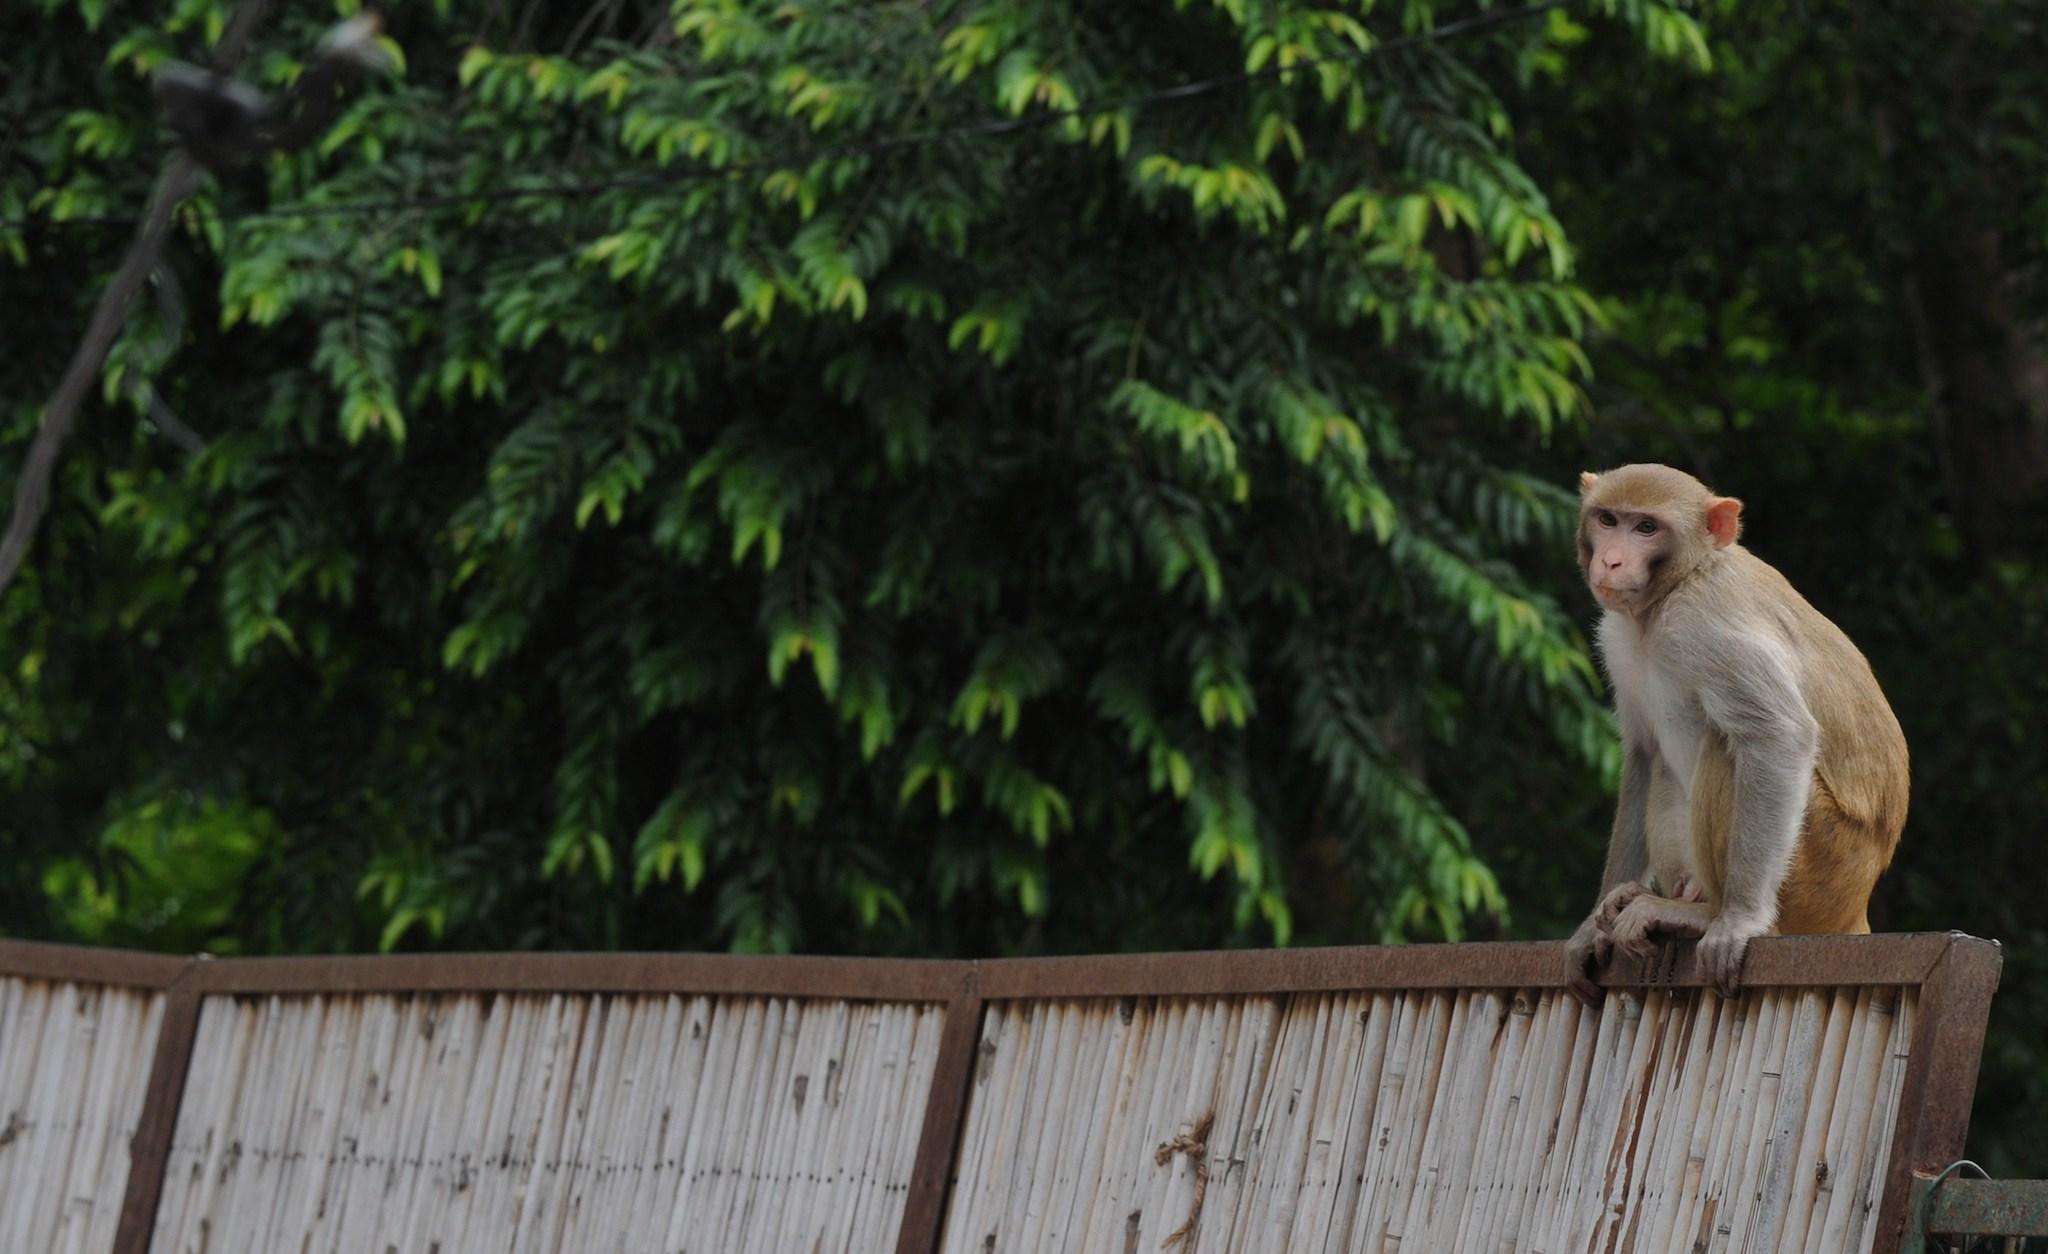 A monkey sits on a fence in the backyard of a home in New Delhi